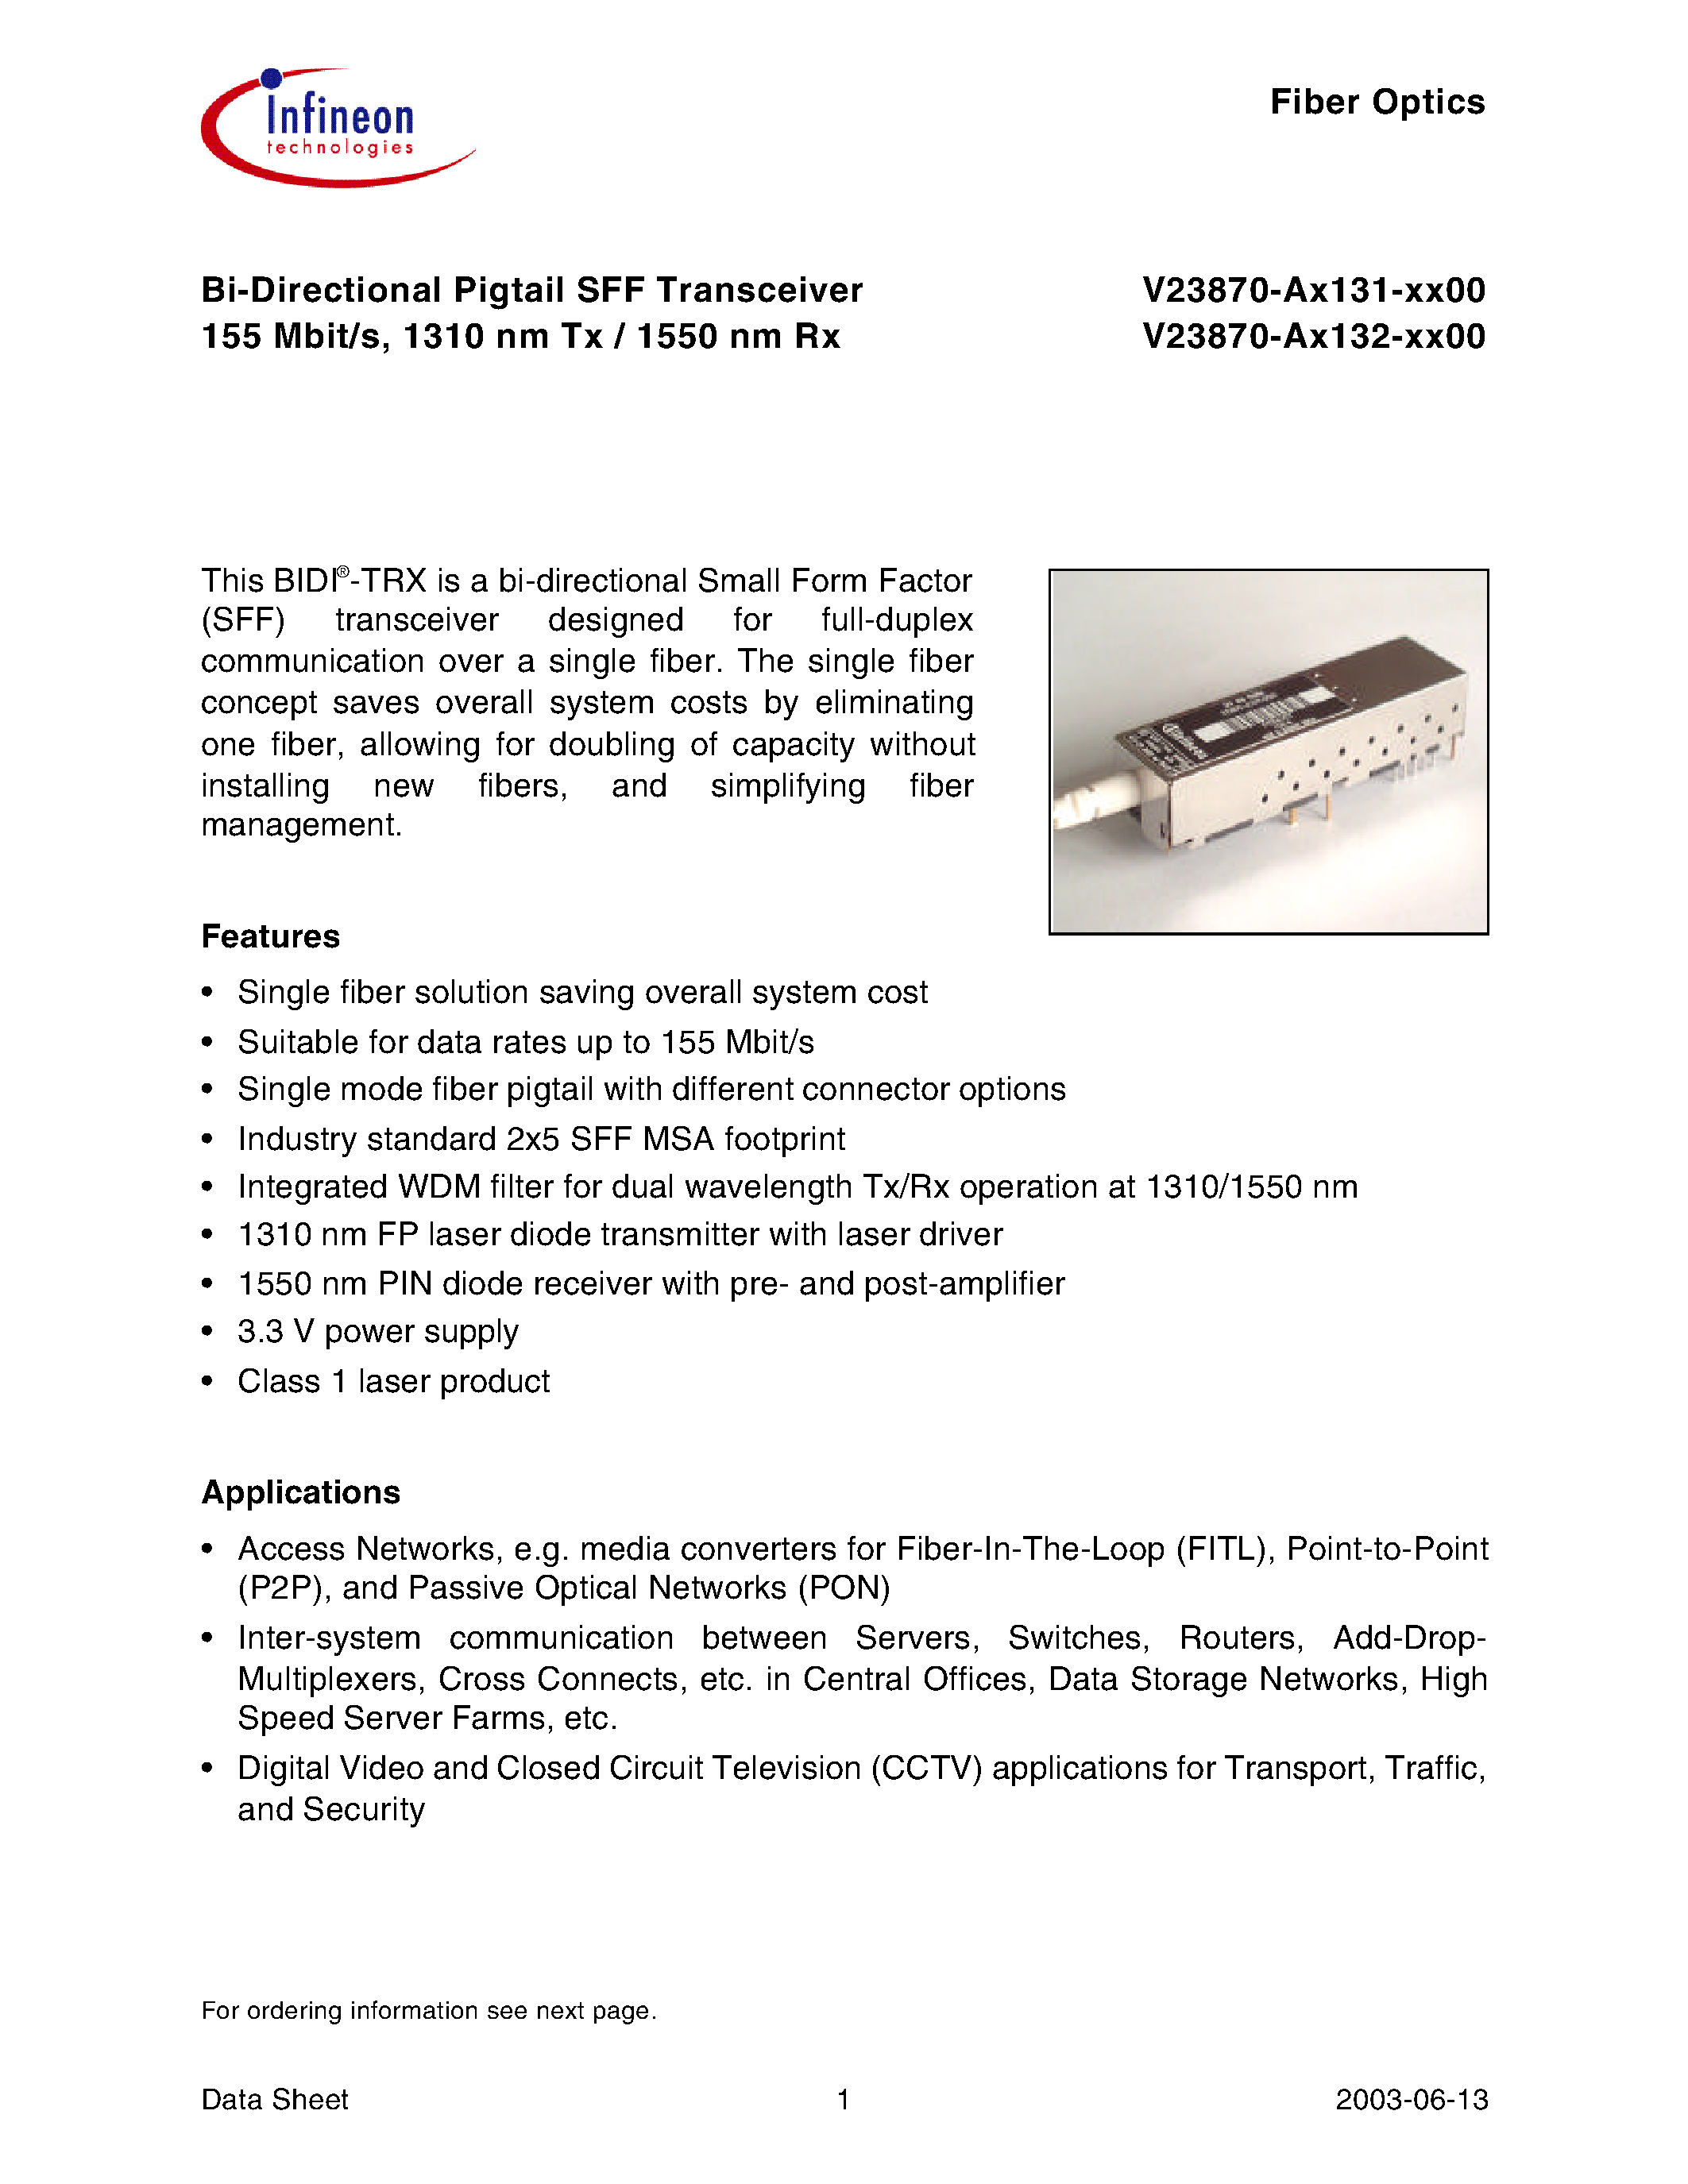 Datasheet V23870-A3132-C200 - Bi-Directional Pigtail SFF Transceiver 155 Mbit/s/ 1310 nm Tx / 1550 nm Rx page 1